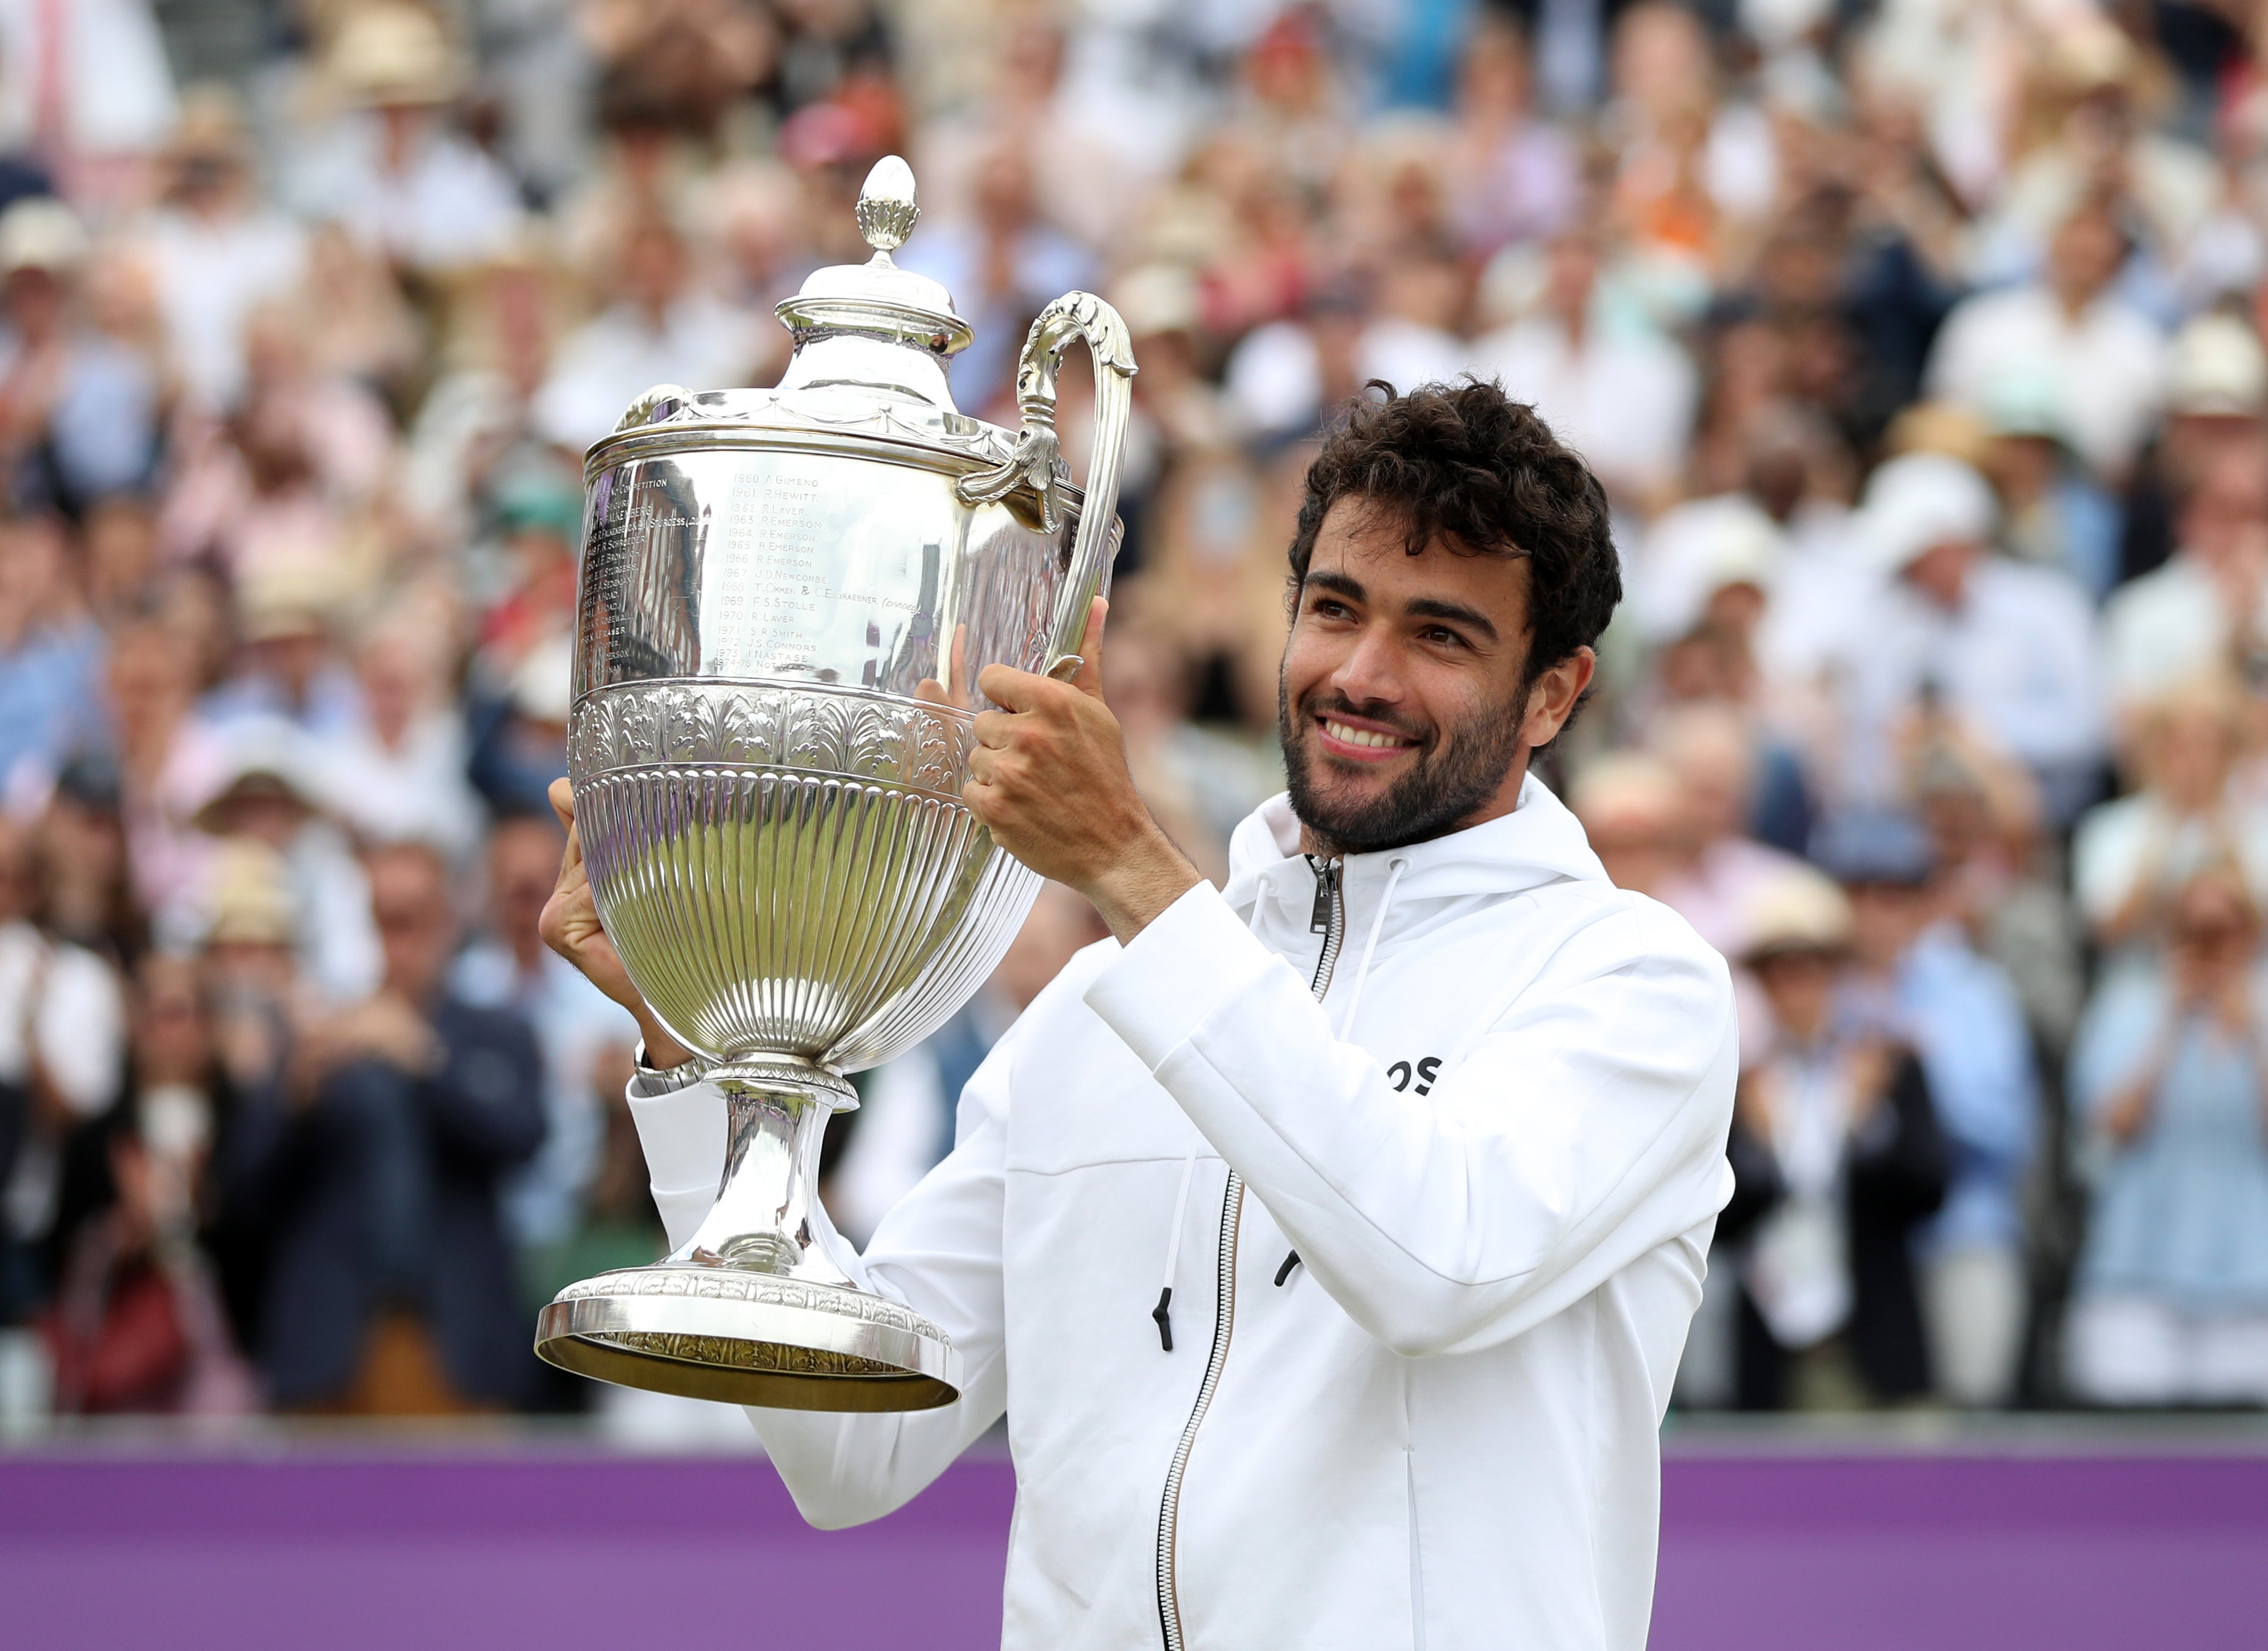 Matteo Berrettini was one of the favourites after winning at Queen’s Club